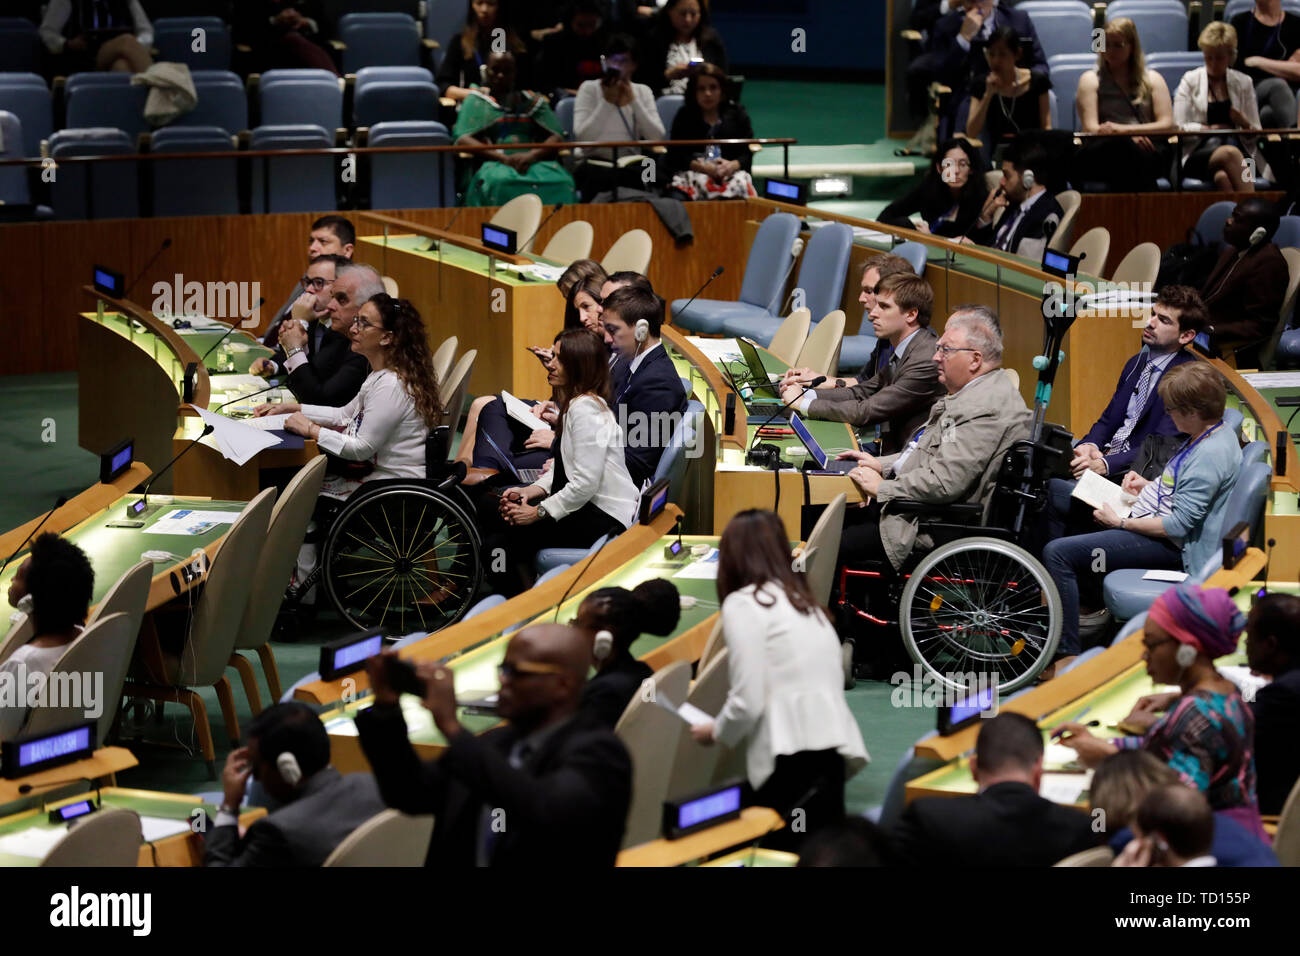 United Nations. 11th June, 2019. Photo taken on June 11, 2019 shows the 12th Session of the Conference of States Parties to the Convention on the Rights of Persons with Disabilities at the UN headquarters in New York. The acting chair of Committee on the Rights of Persons with Disabilities said on Tuesday that due to cash flow difficulties United Nations is facing, sessions of six of the ten UN human rights treaty bodies will be cancelled. Credit: Li Muzi/Xinhua/Alamy Live News Stock Photo